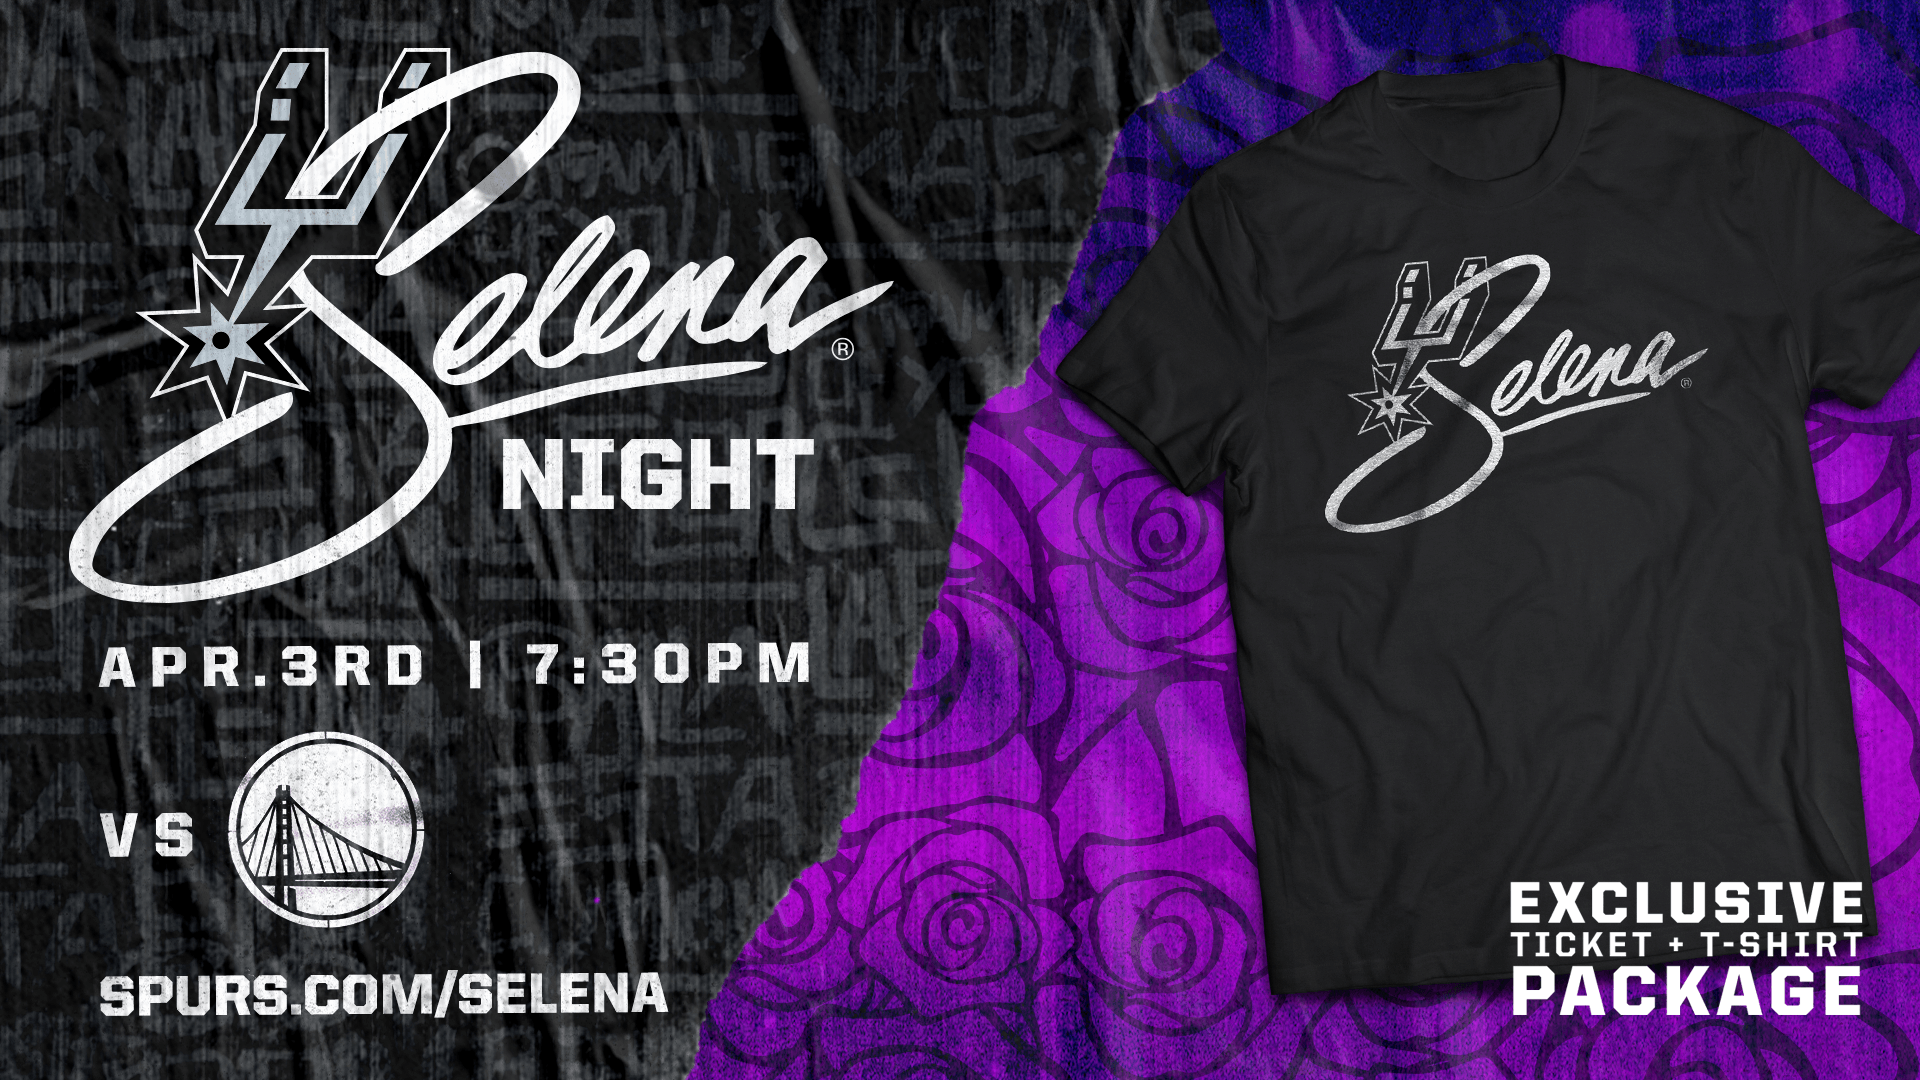 Spurs announce first-ever Selena night, merchandise line featuring the two  San Antonio favorites